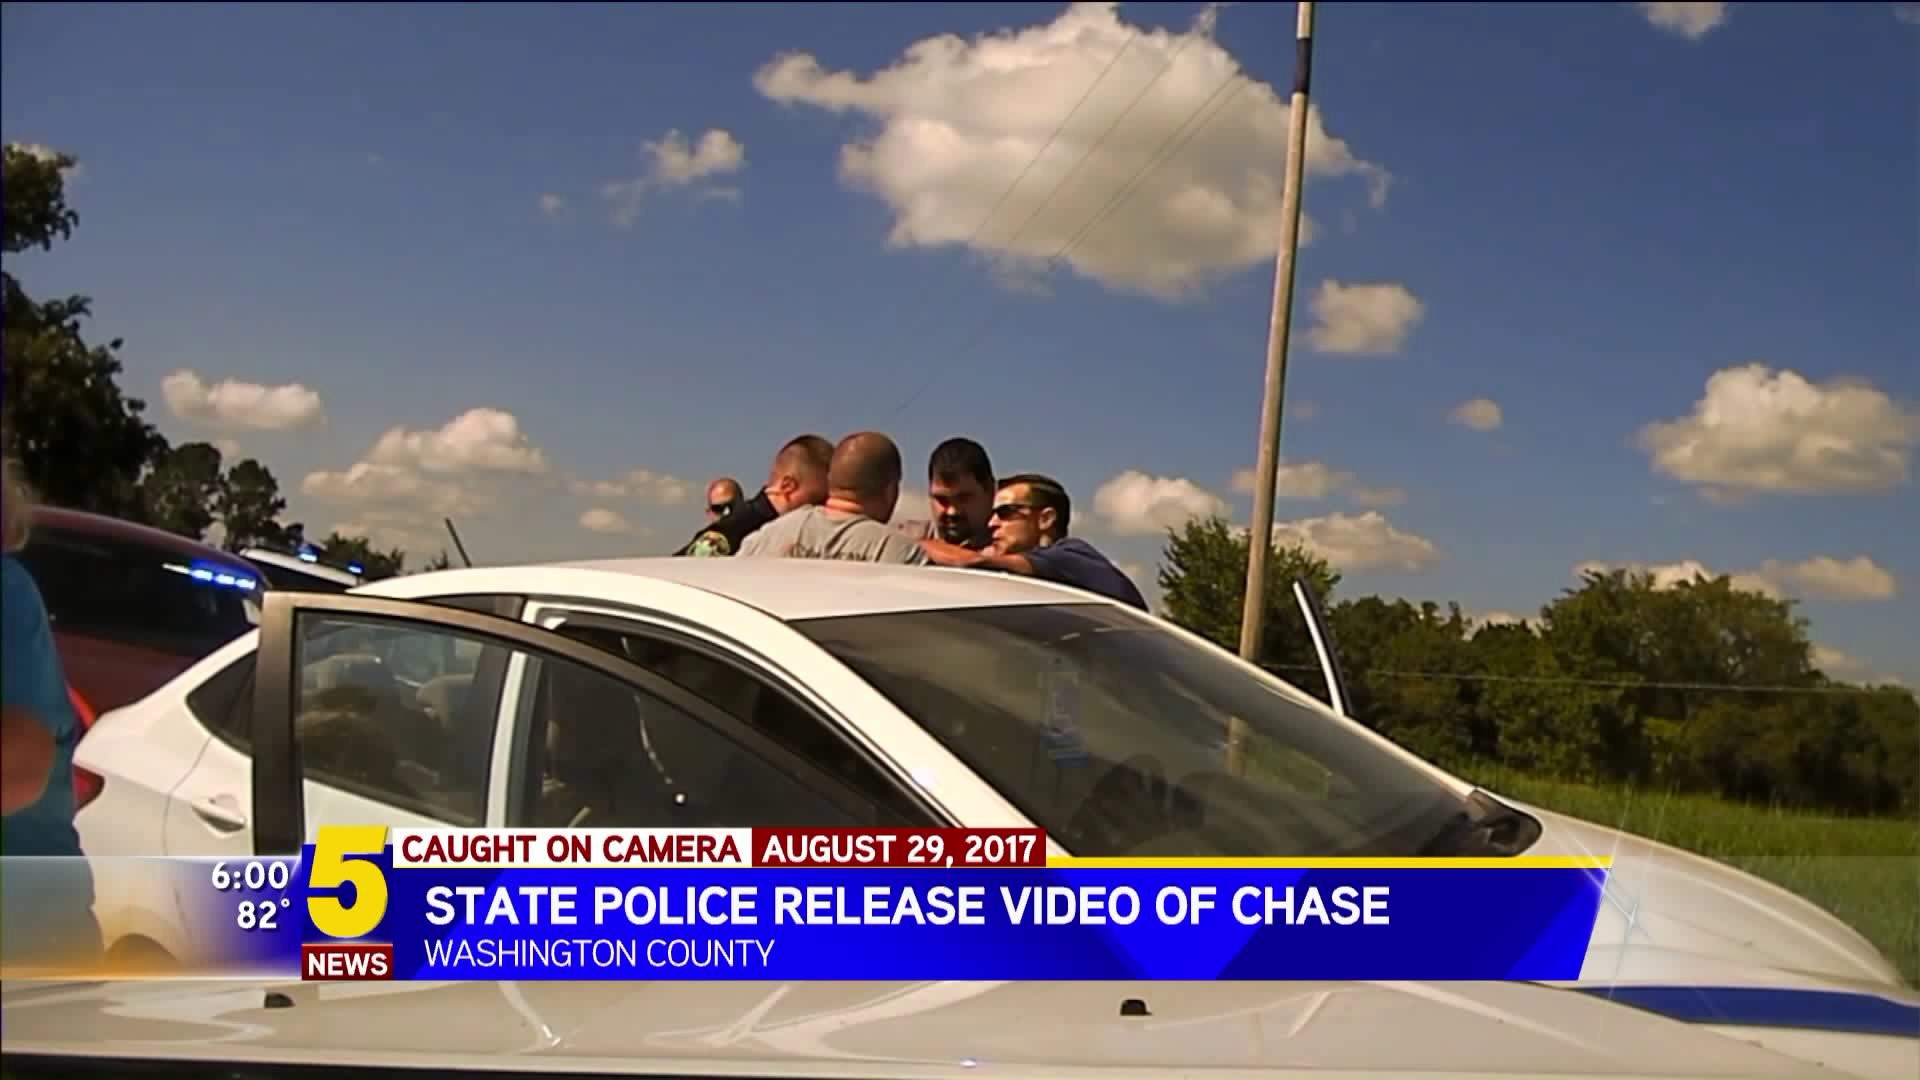 WATCH Arkansas State Police Release Footage Of HighSpeed Car Chase